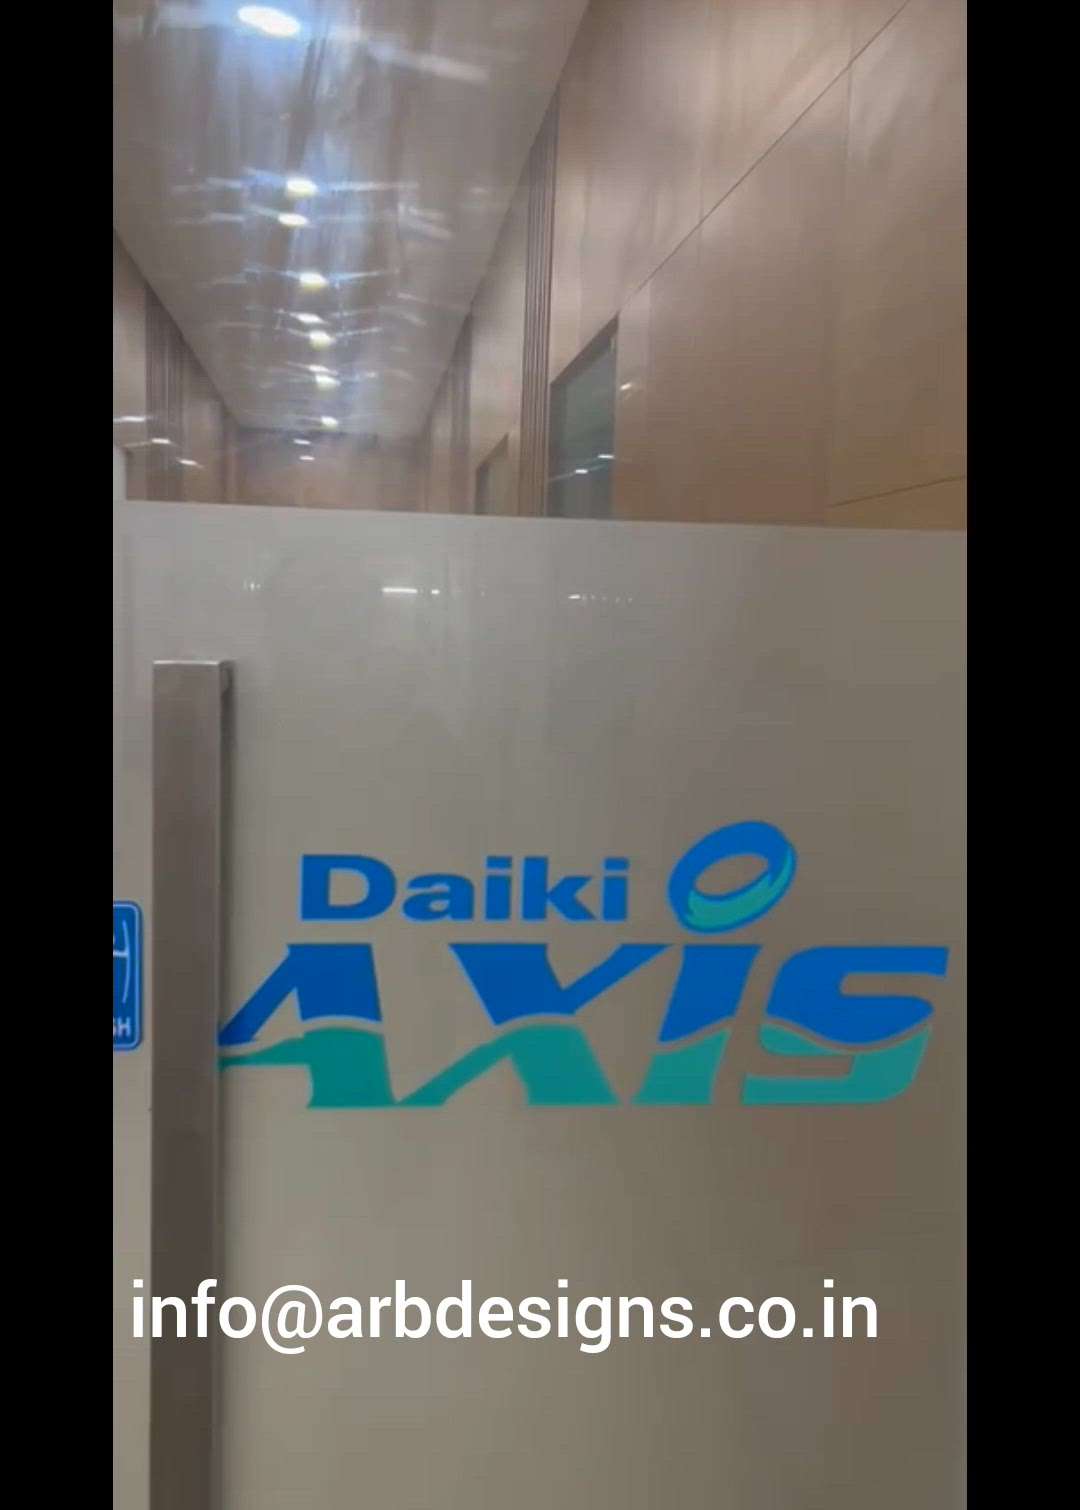 We are extremely excited to share that with grace of God, blessings of elders and wishes of loved ones, ARBDesigns has successfully handed over their first MNC commercial project for Daiki Axis, India (Headquarters at Japan). Scope of works : Designs and execution.